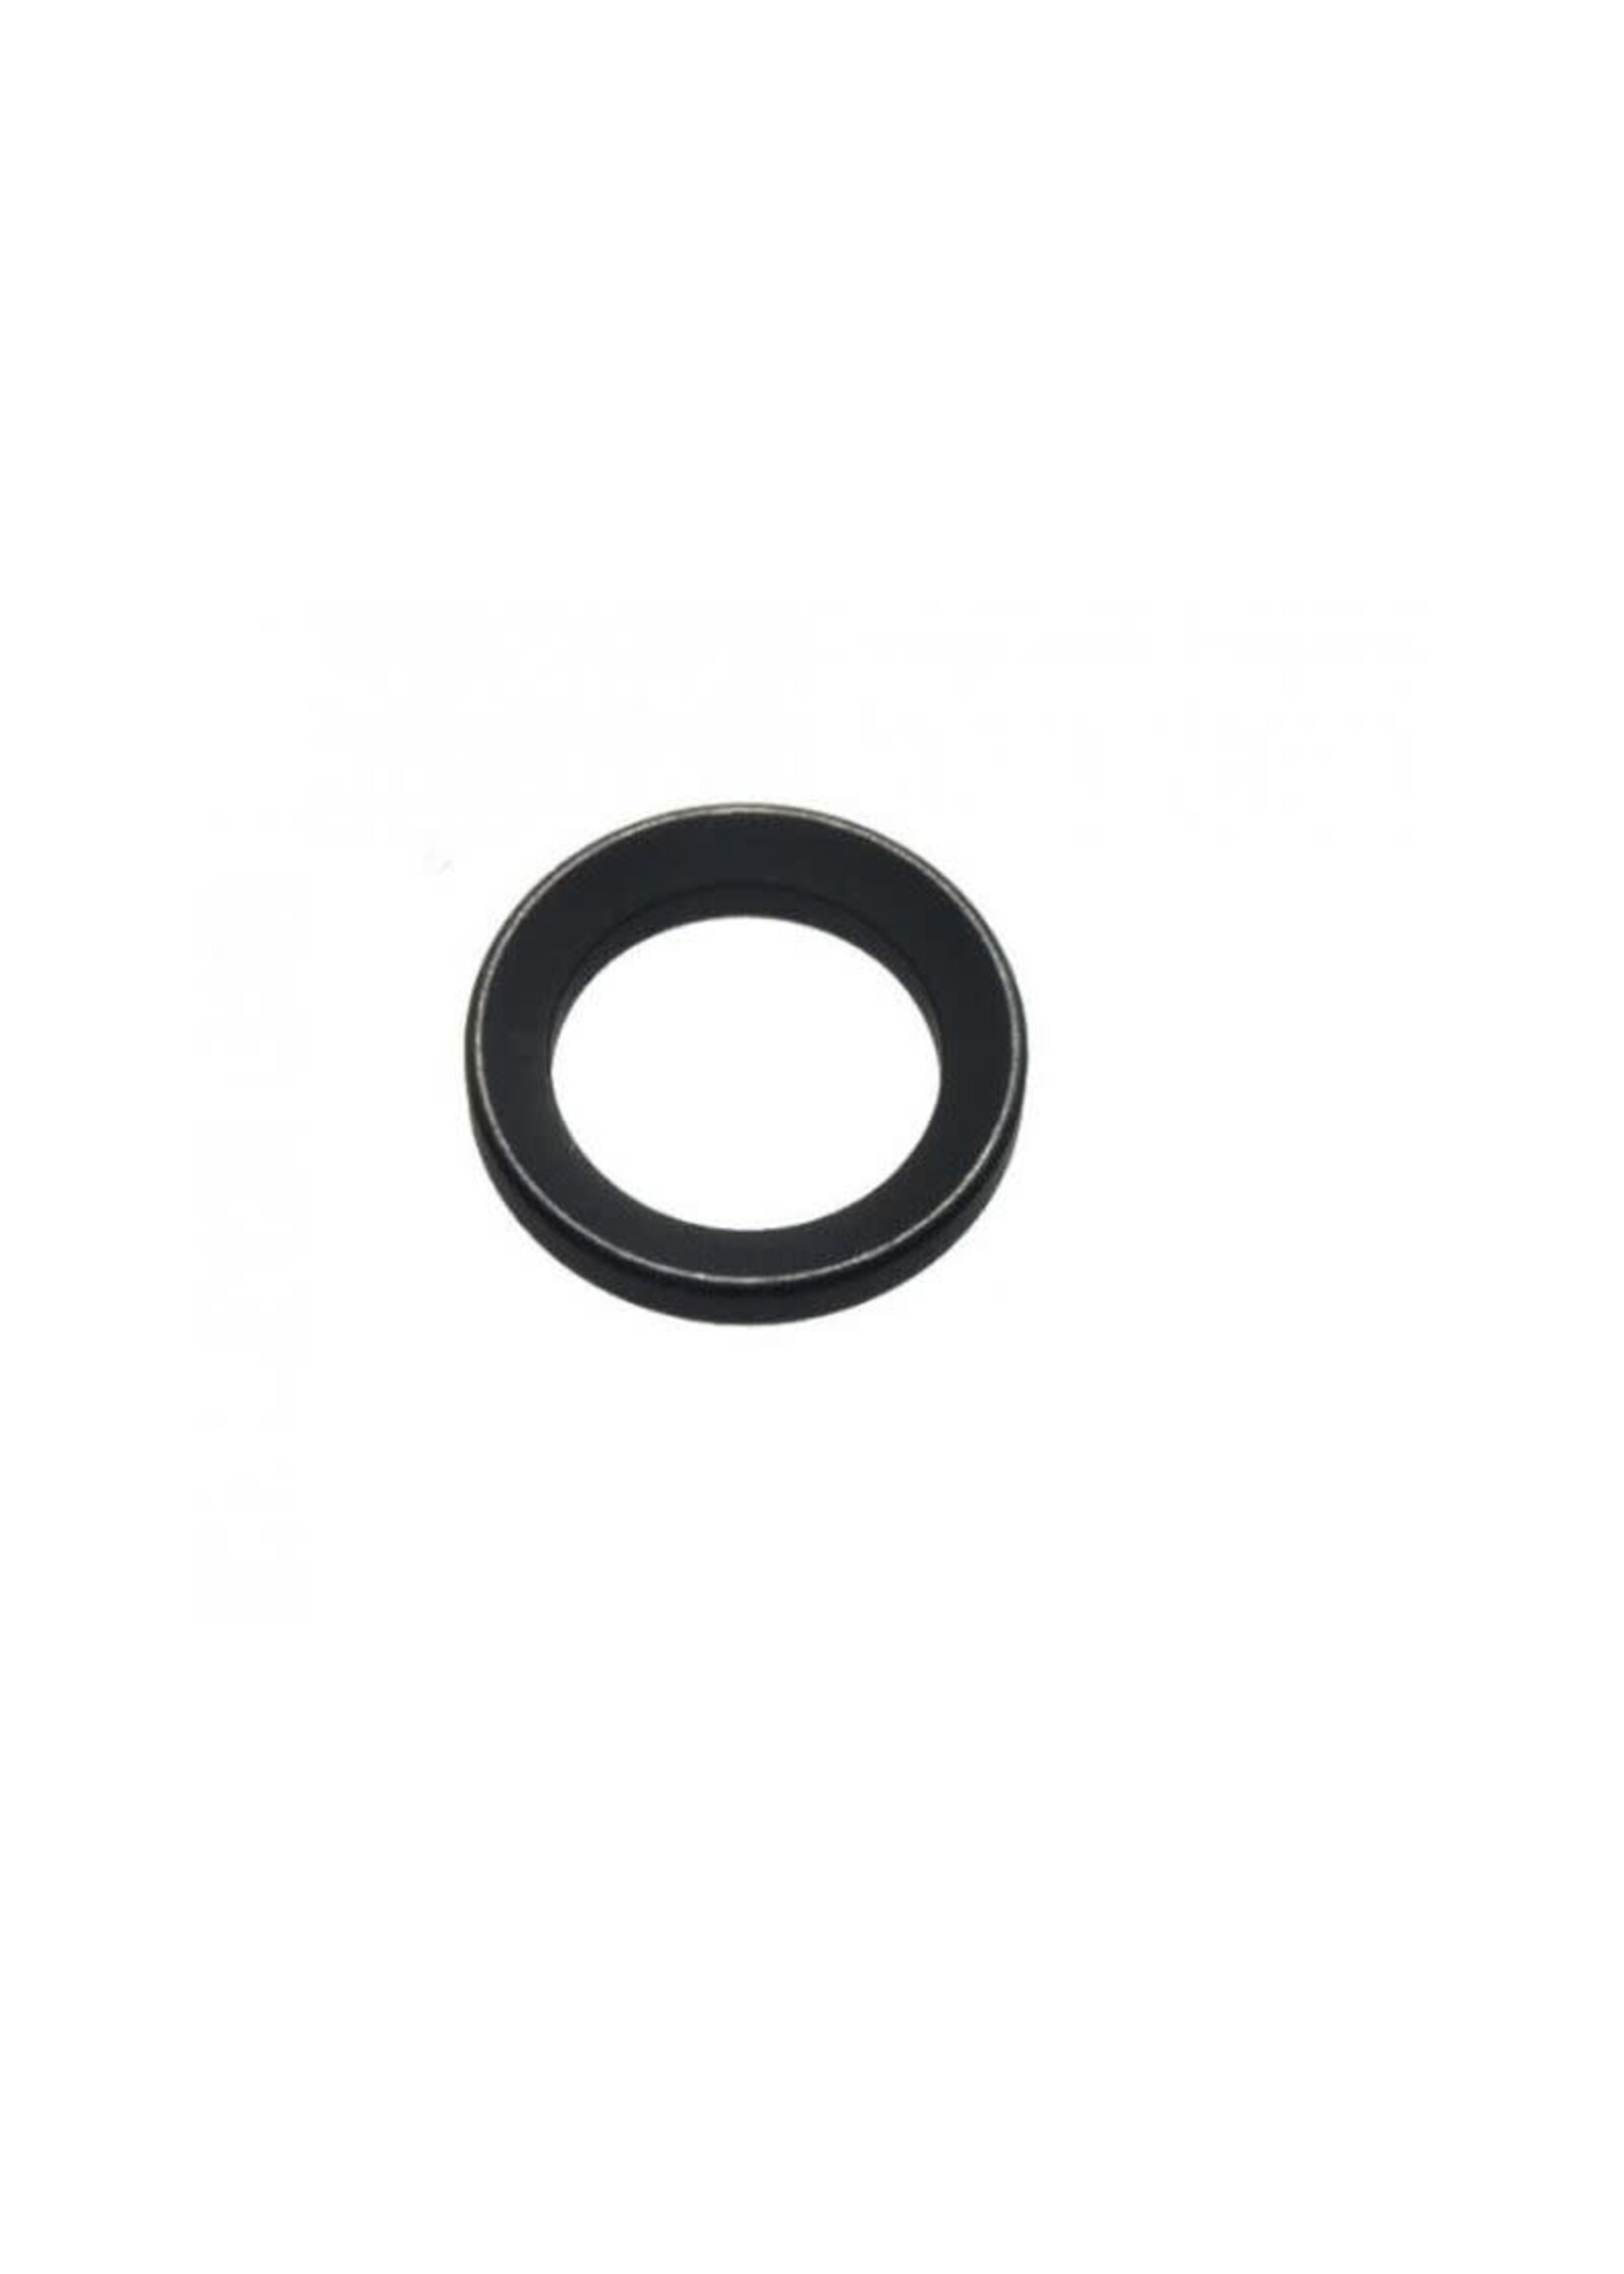 STRIKE INDUSTRIES AR CRUSH WASHER FOR 556/223